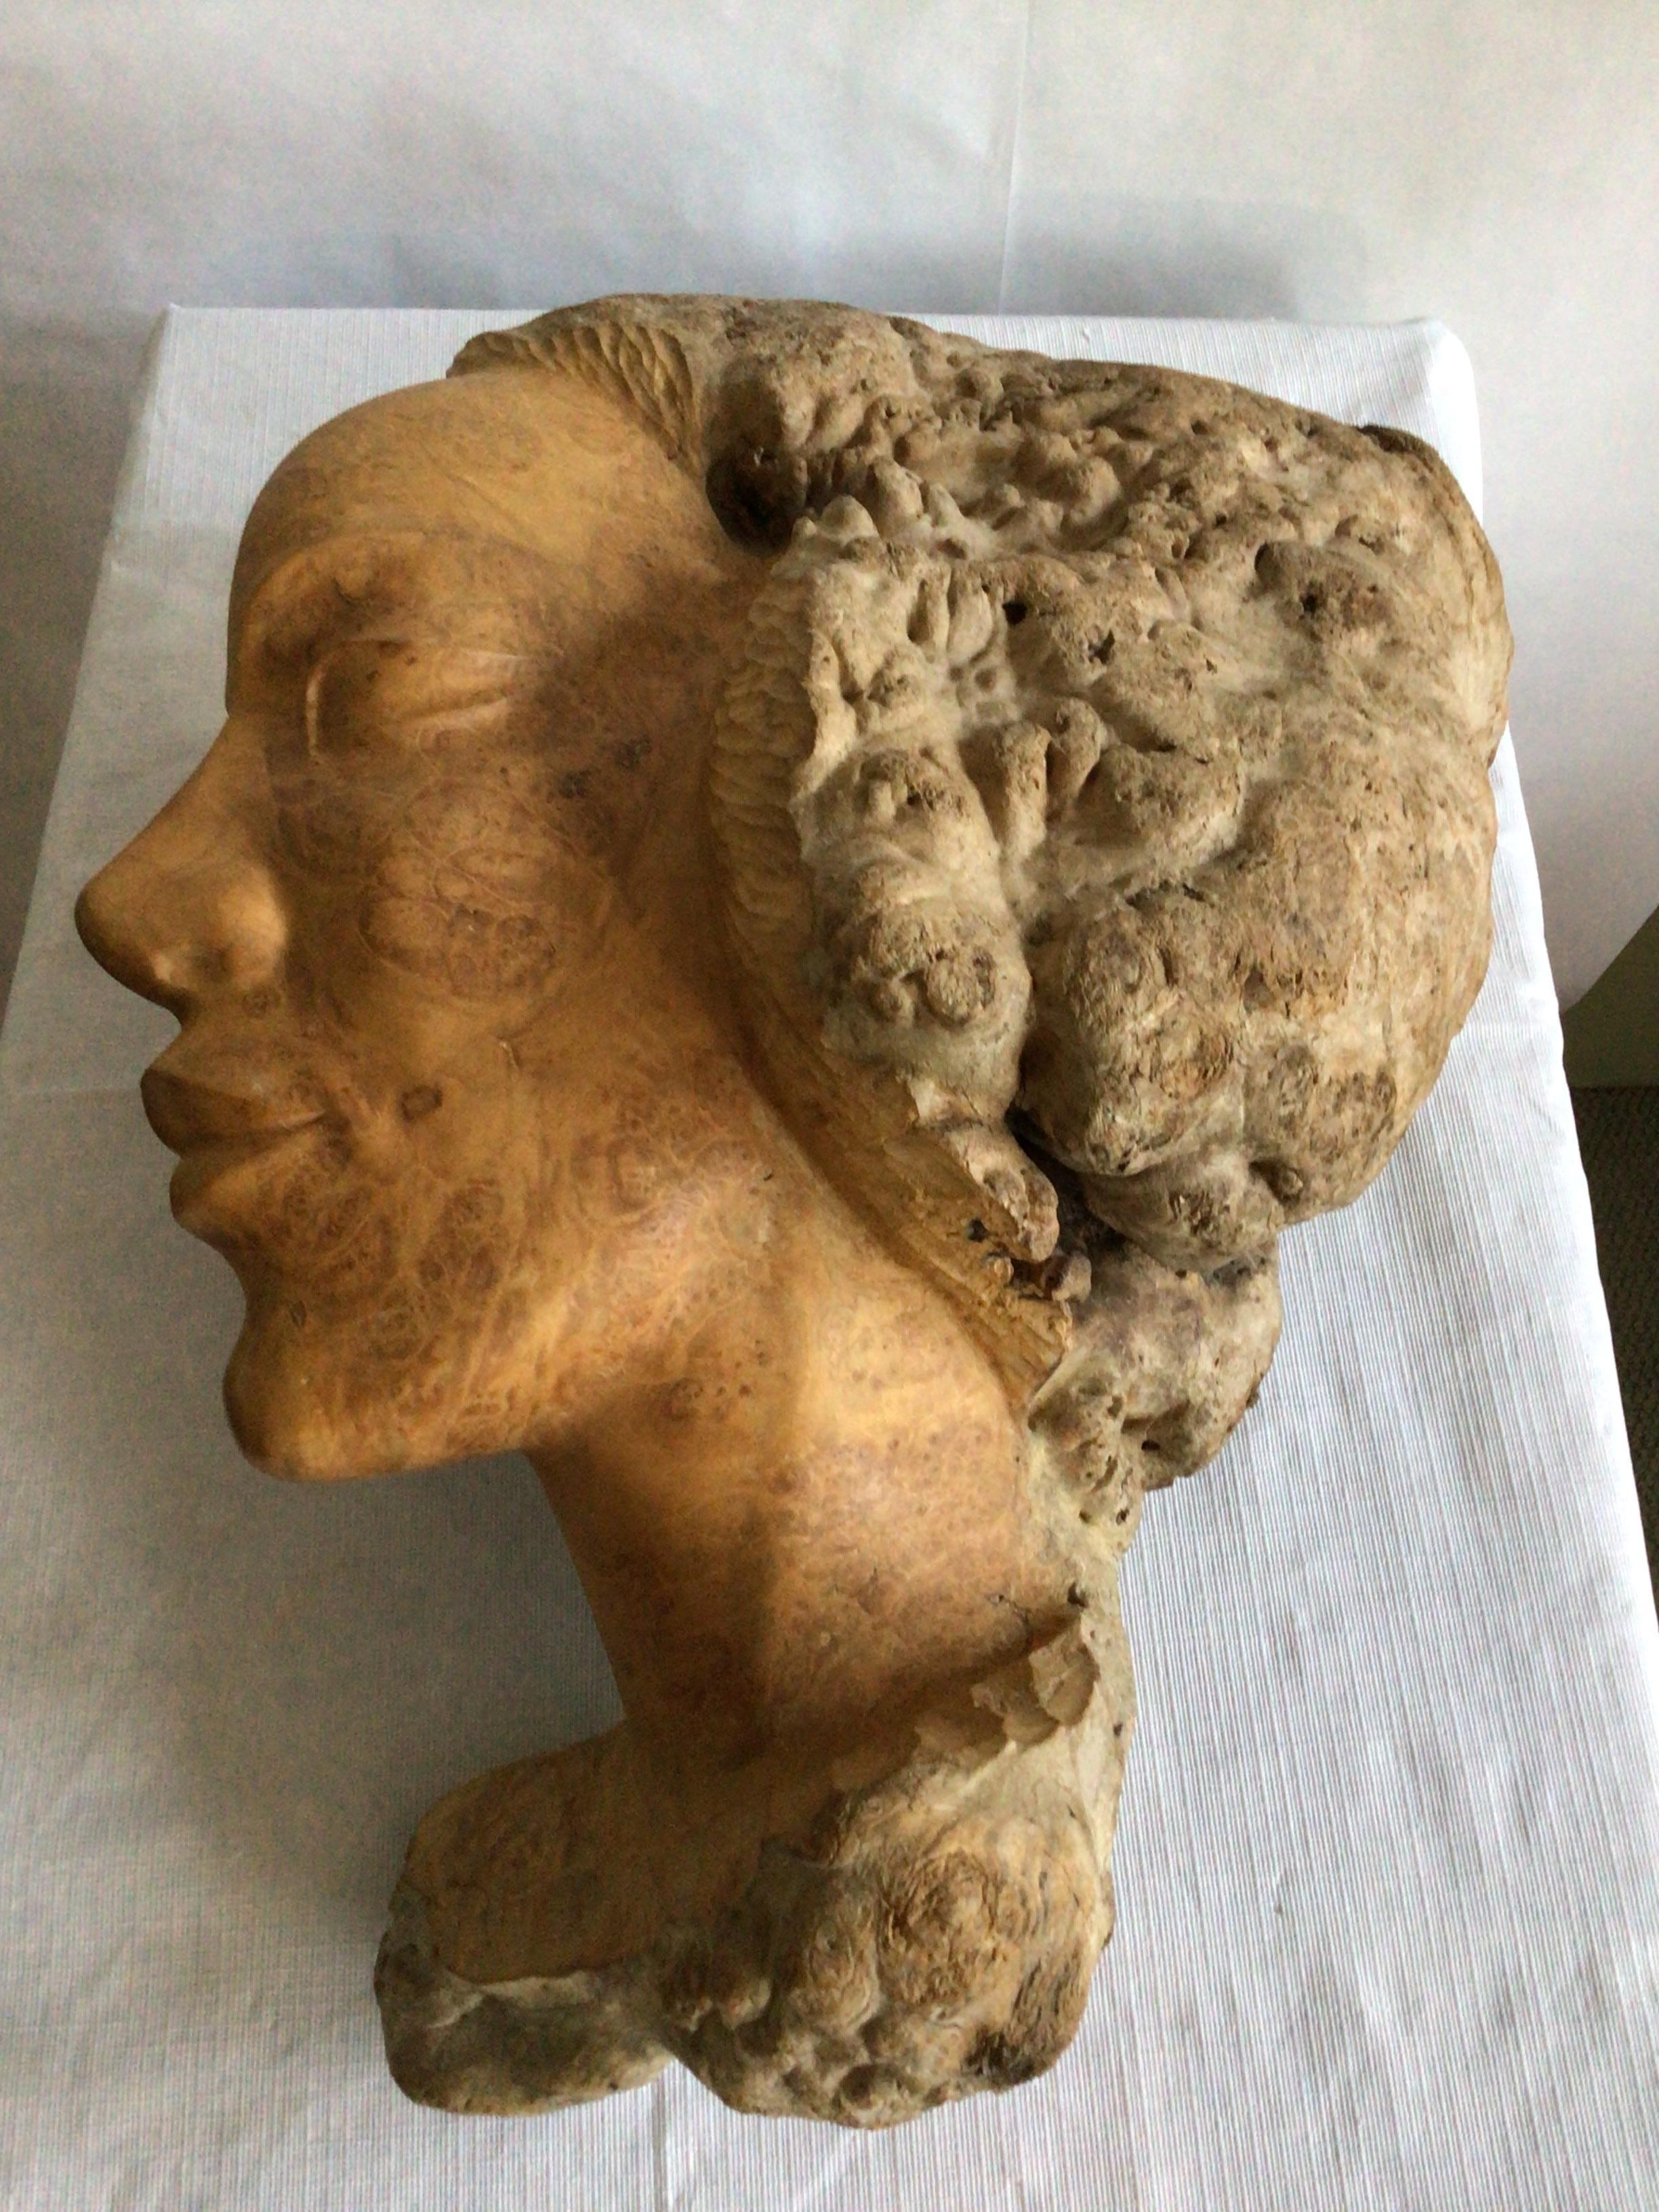 1960s Burl Wood Carving of A Woman's Face
Warm natural burl wood tones add texture and interest to this hand-carved sculpture
Natural and yet refined 
Small chip in burl as shown in picture